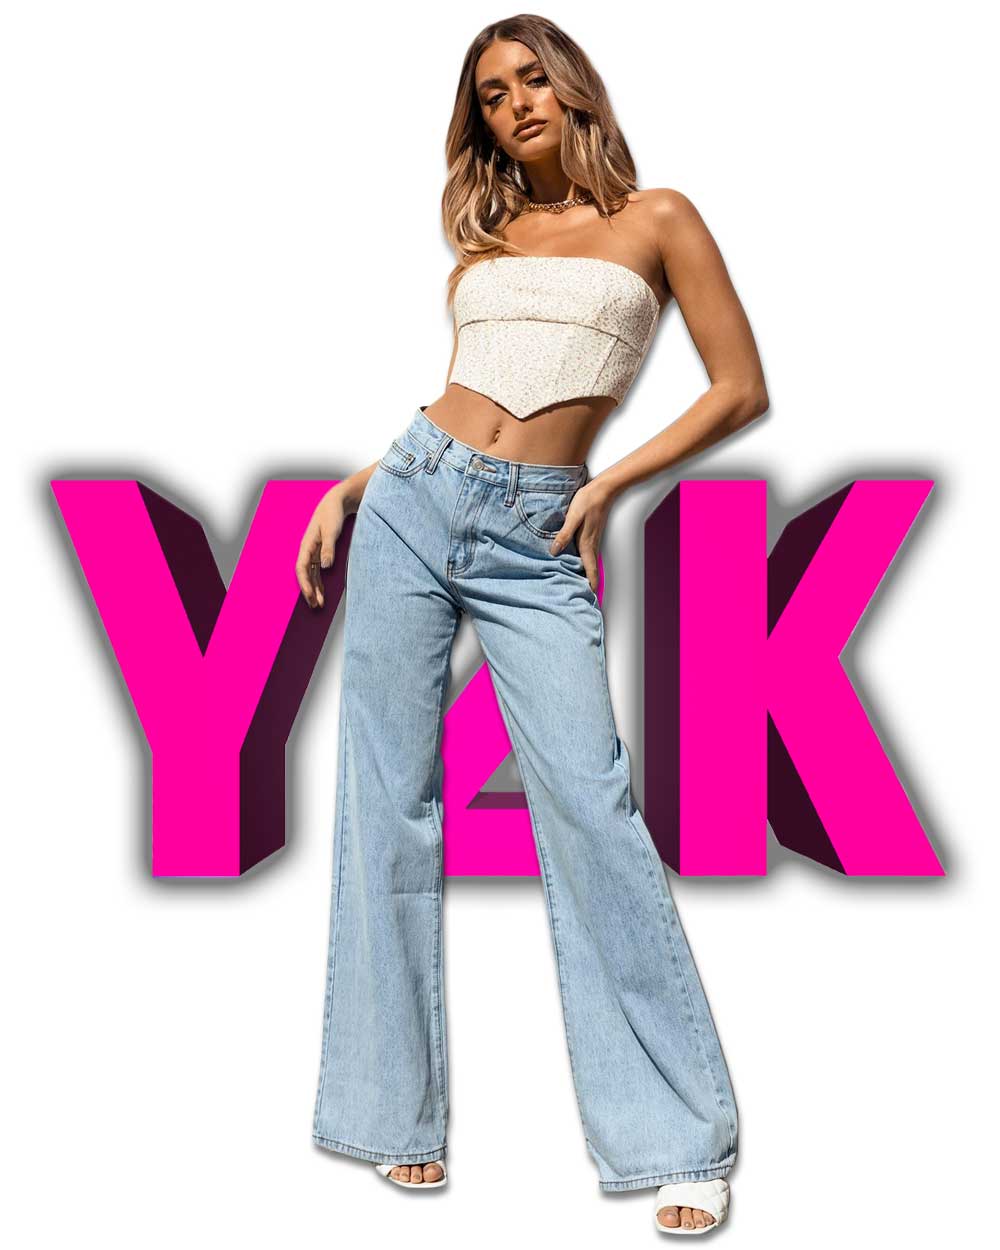 Nostalgia Meets Design: Incorporating Y2K Aesthetic into Your Branding, by  Ladies Who Design